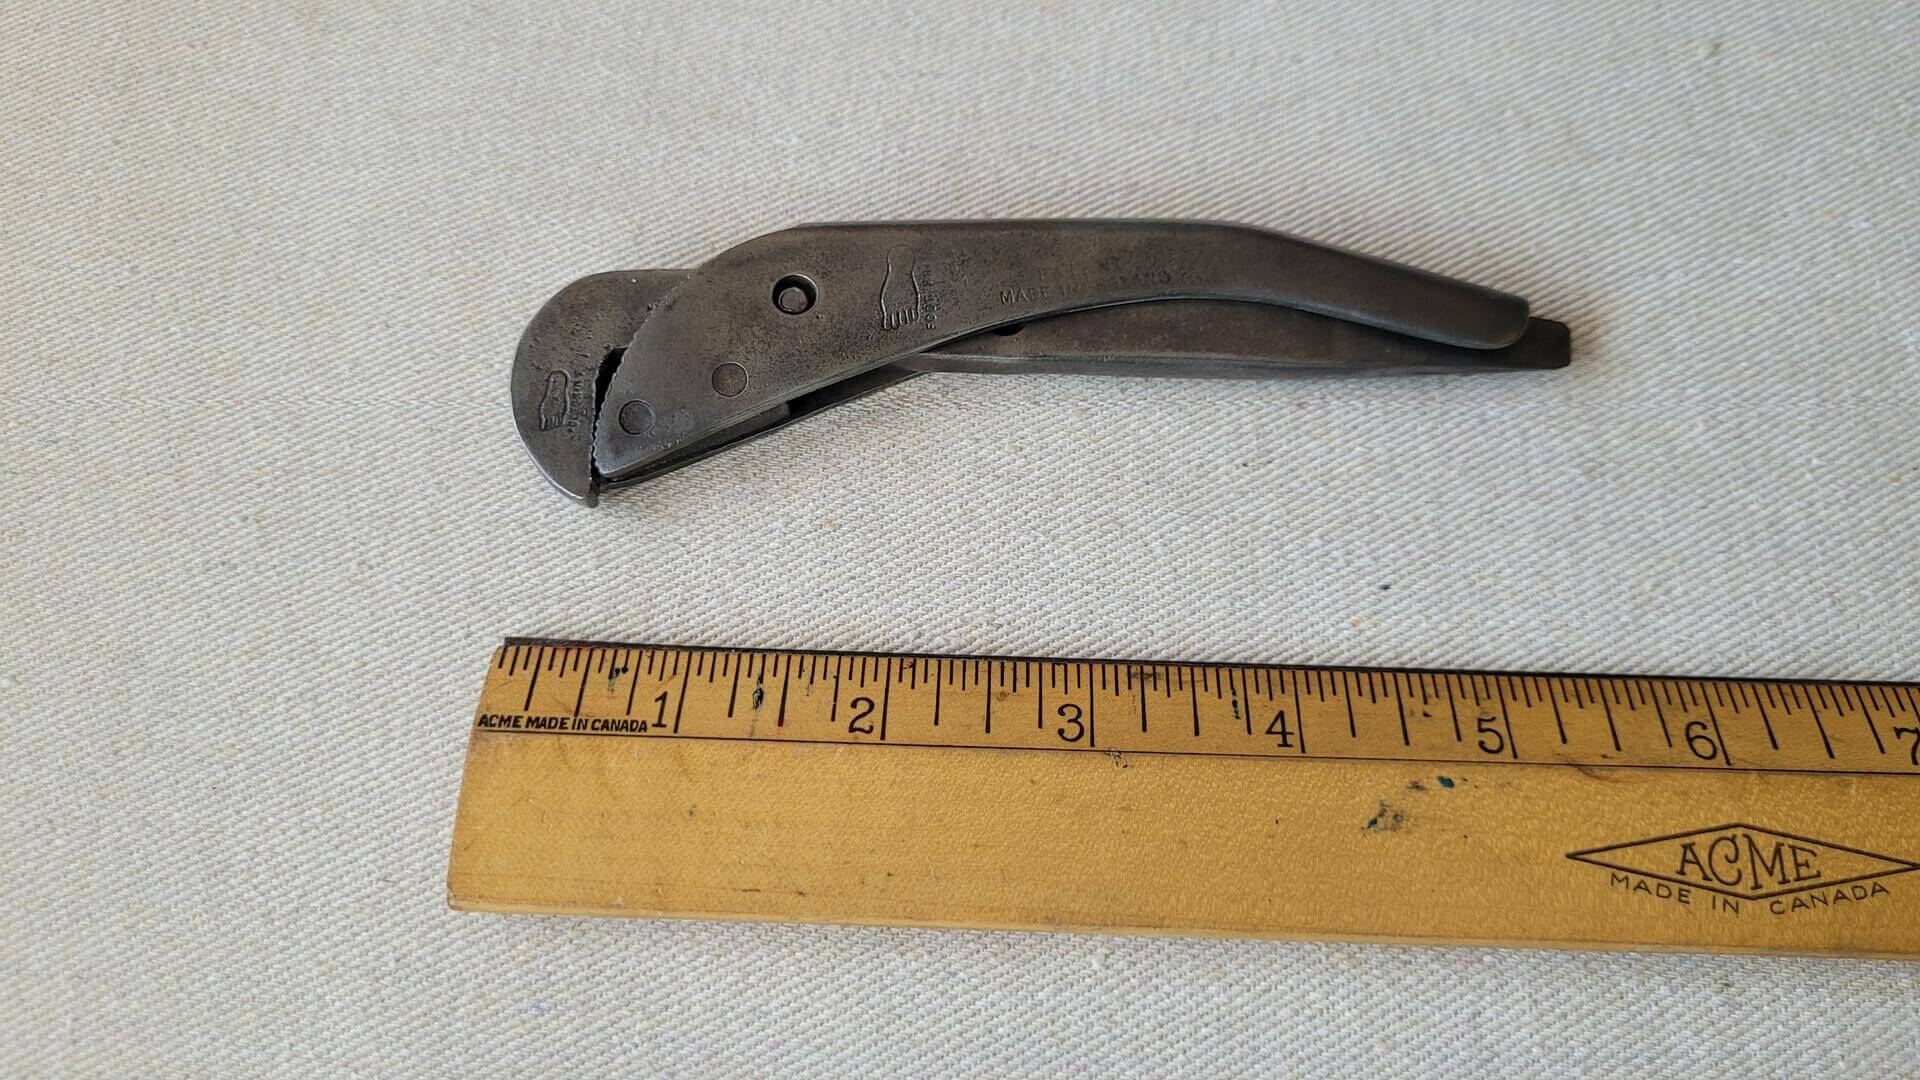 Antique Footprint Original Pattern adjustable pipe wrench spanner designed in 1875 with pin screw and slotted screwdriver end. Vintage made in Sheffield England collectible plumber, electrician, and pipe fitter gripping hand tools